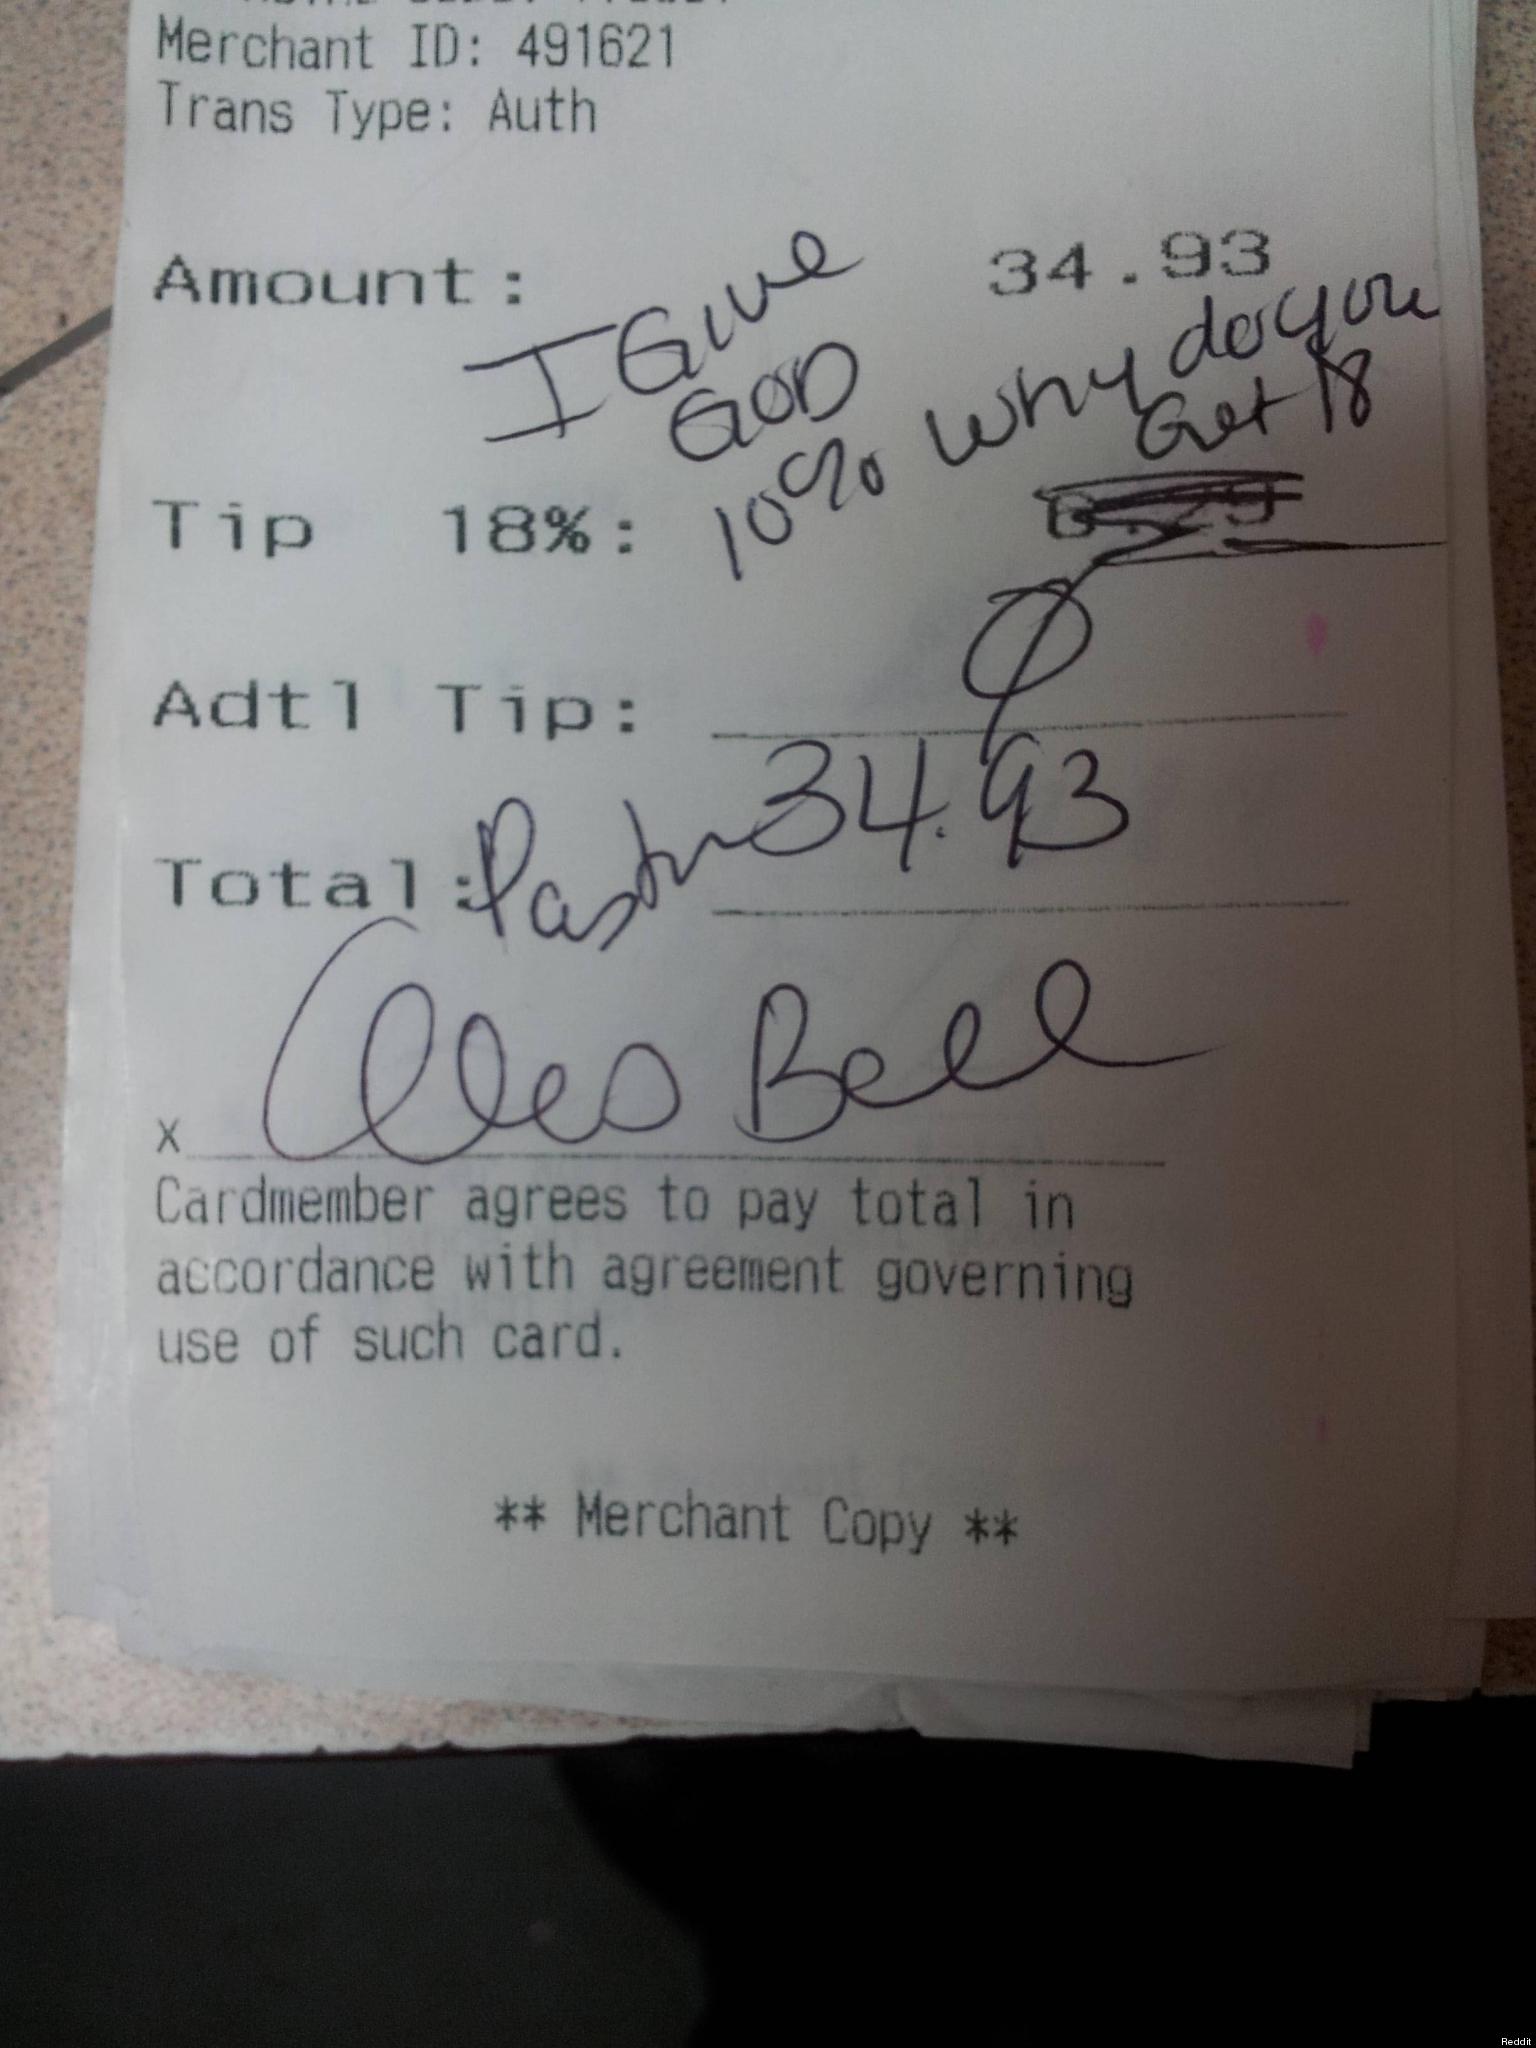 give god 10% why do you get 18 - Merchant Id 491621 Trans Type Auth Amount 34 I Give God Get 18 Tip 18% 100 8% To why do you Adtl Tip Total Petr 34.93 Illes Bell Cardmember agrees to pay total in accordance with agreement governing use of such card. Merch